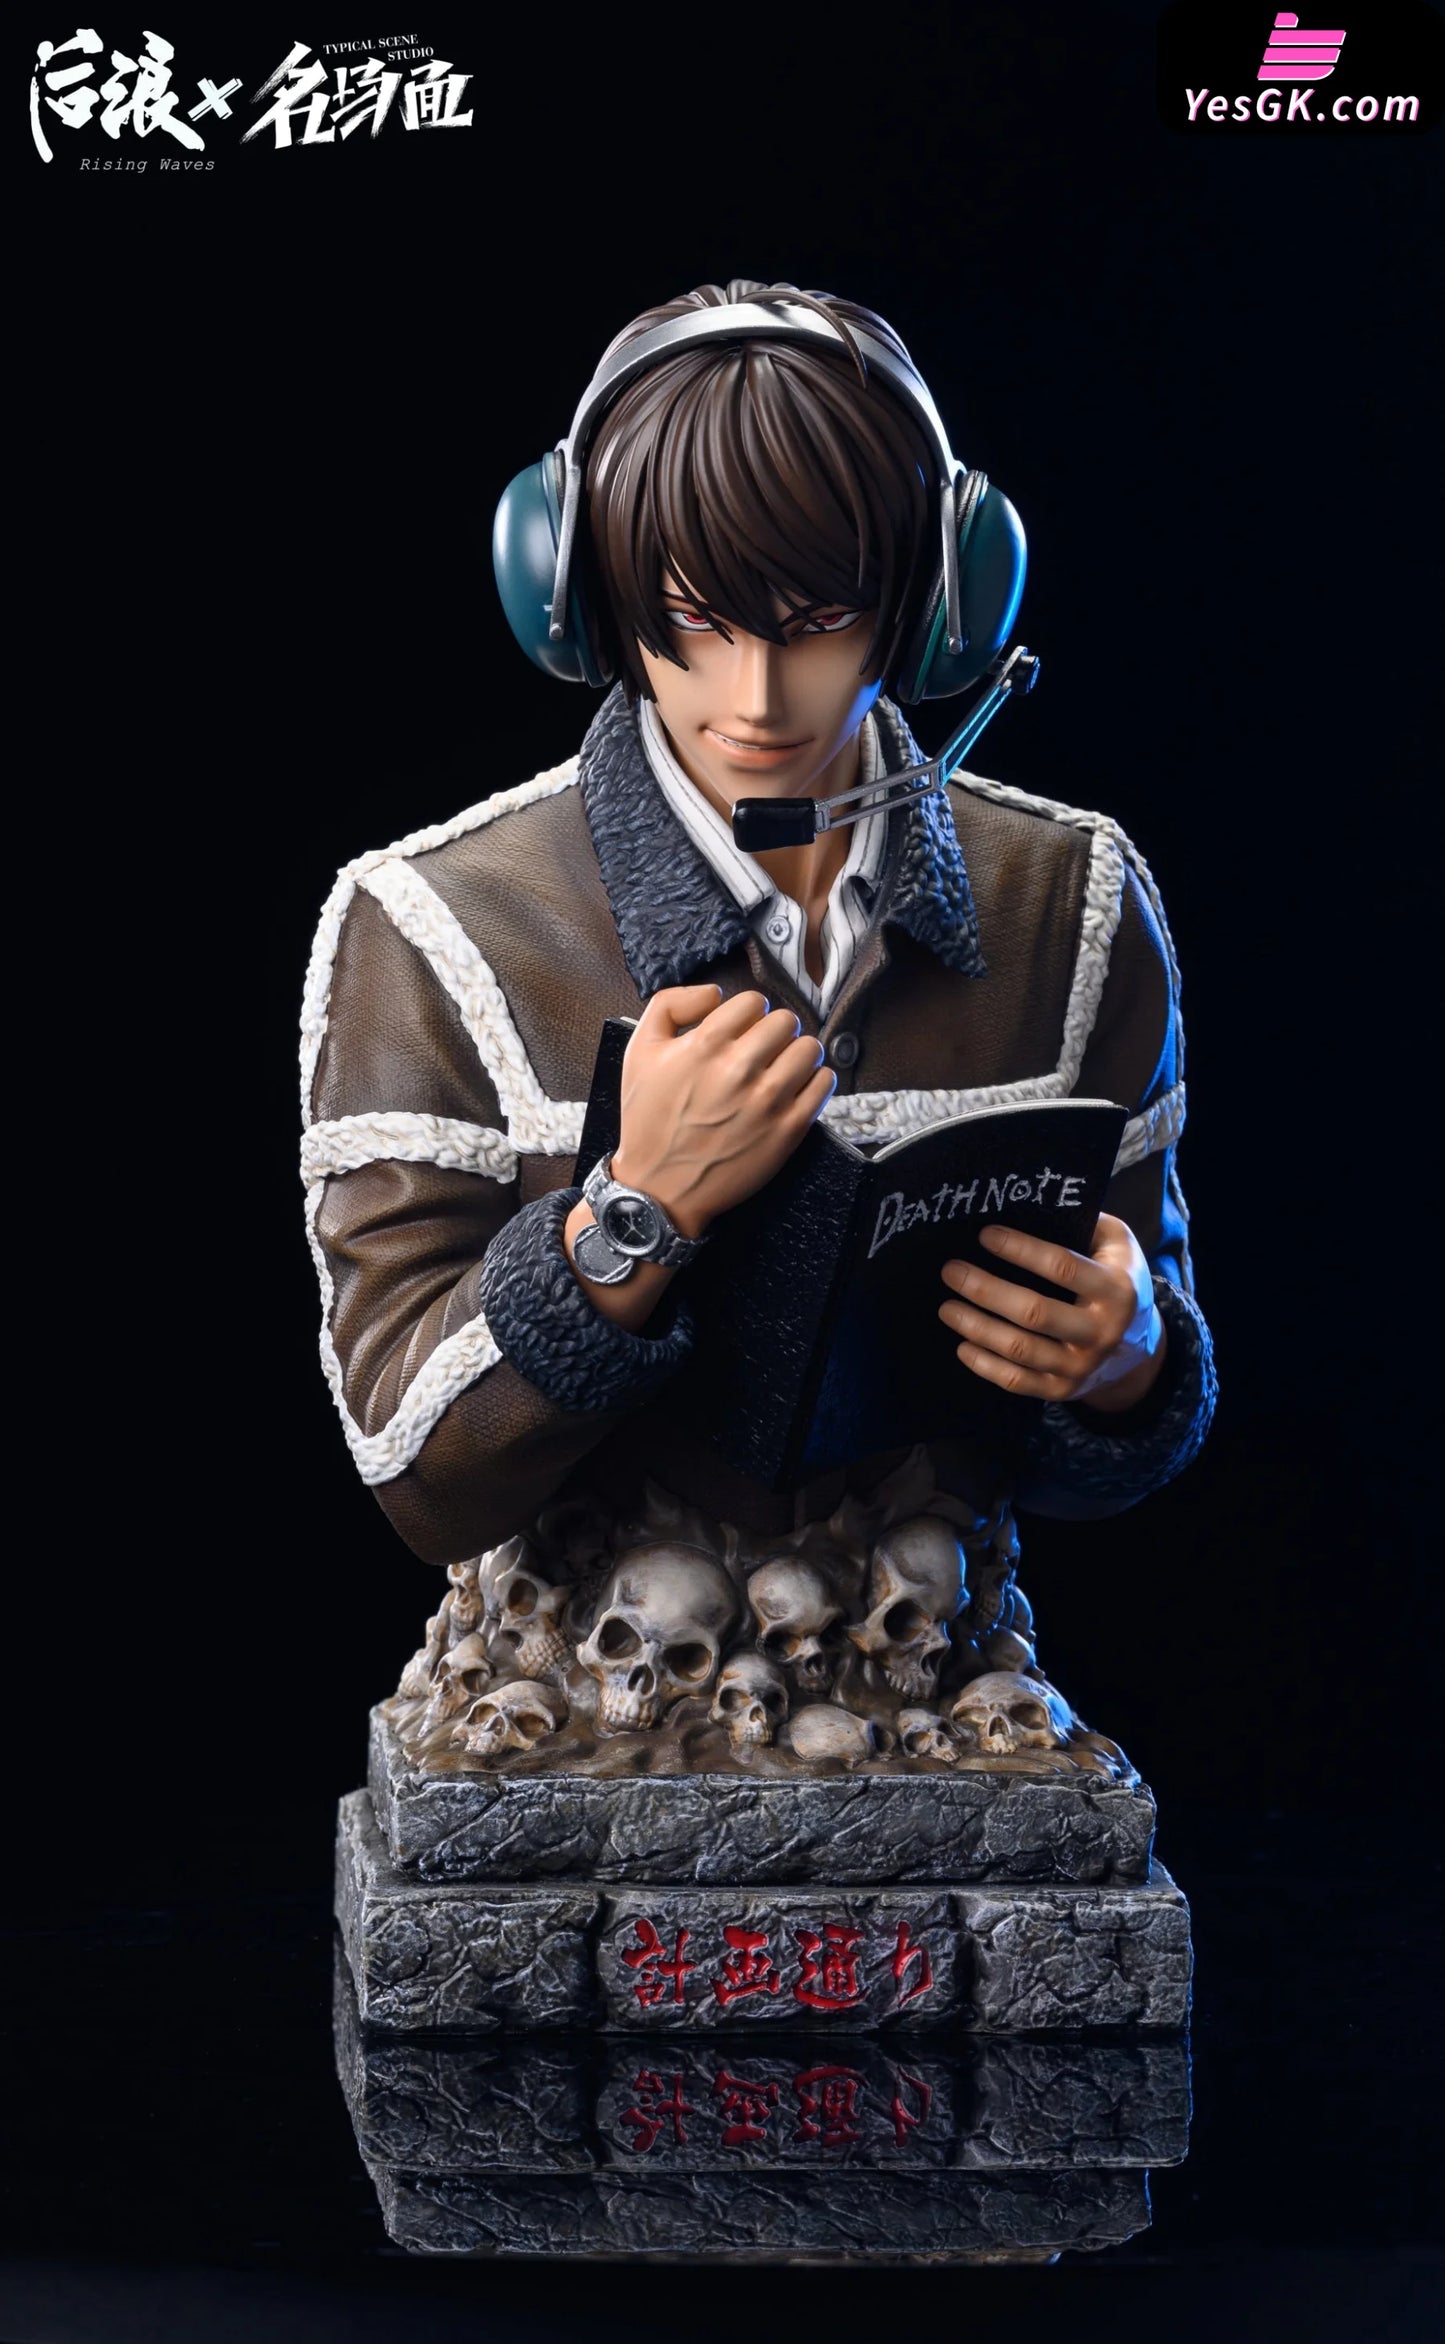 Death Note Yagami Light Bust Resin Statue - Rising Waves Studio & Typical Scene [Pre-Order] Deposit